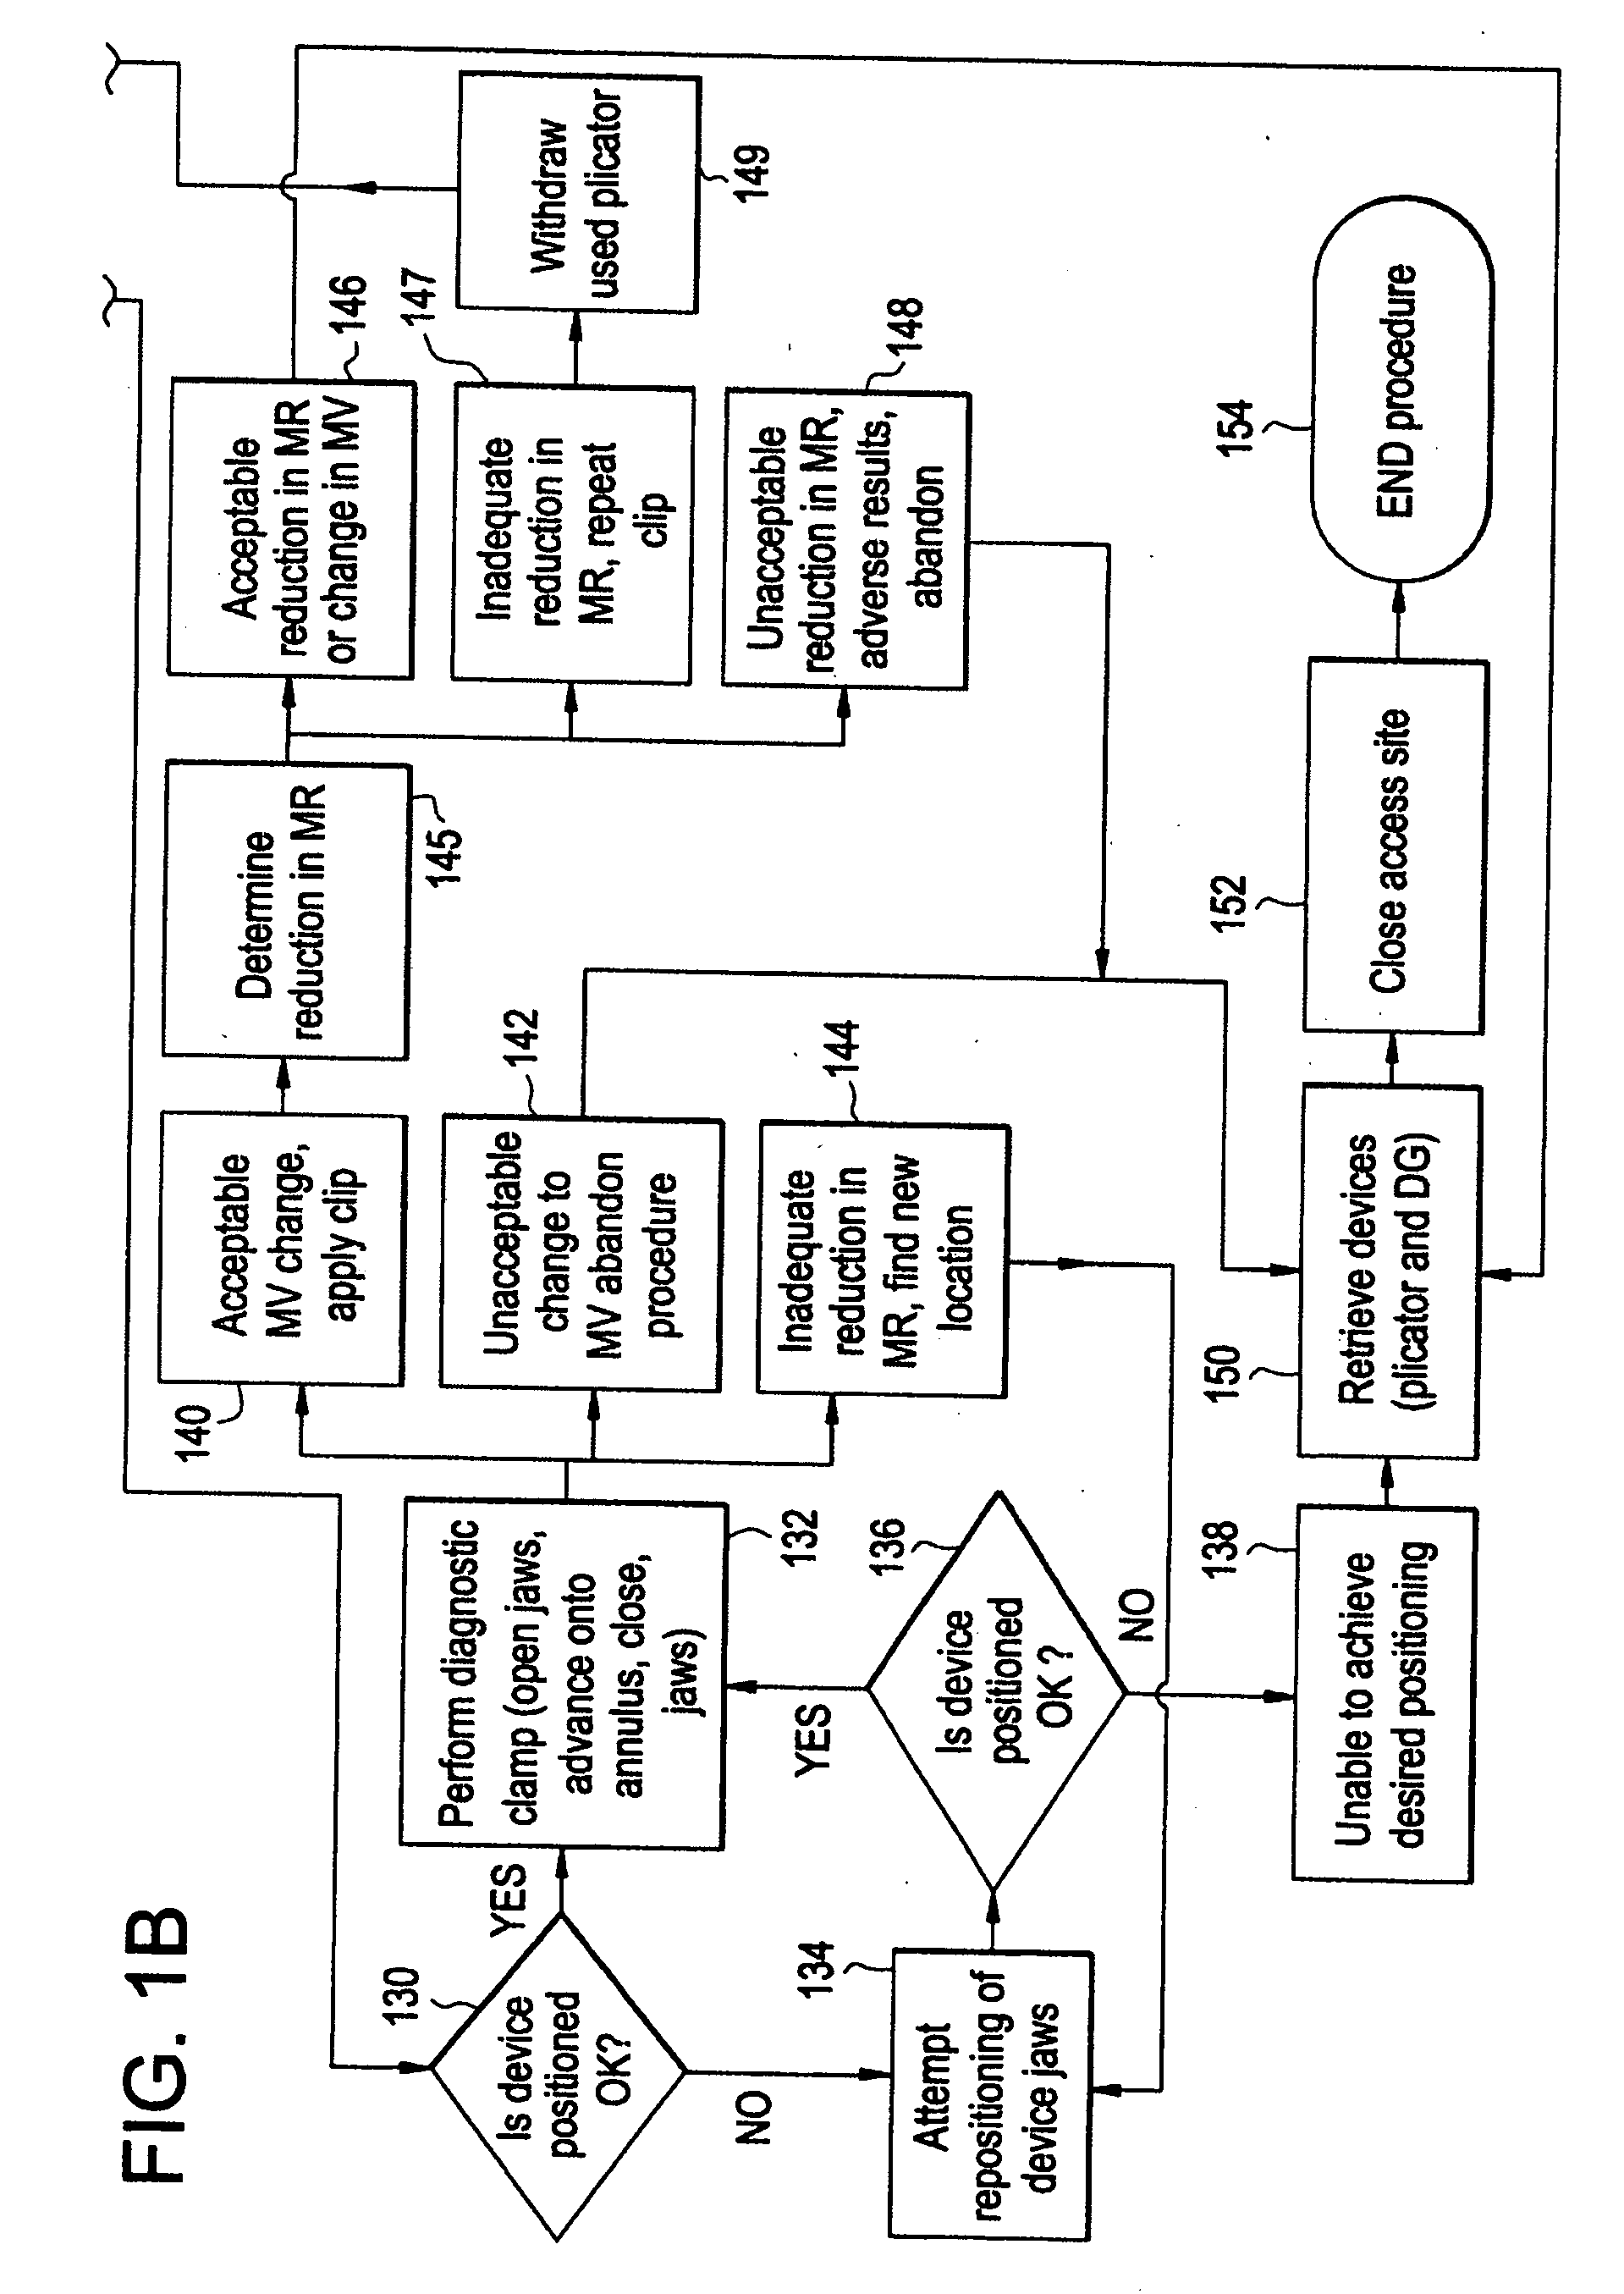 Method and system for plicating tissue in a minimally invasive medical procedure for the treatment of mitral valve regurgitation